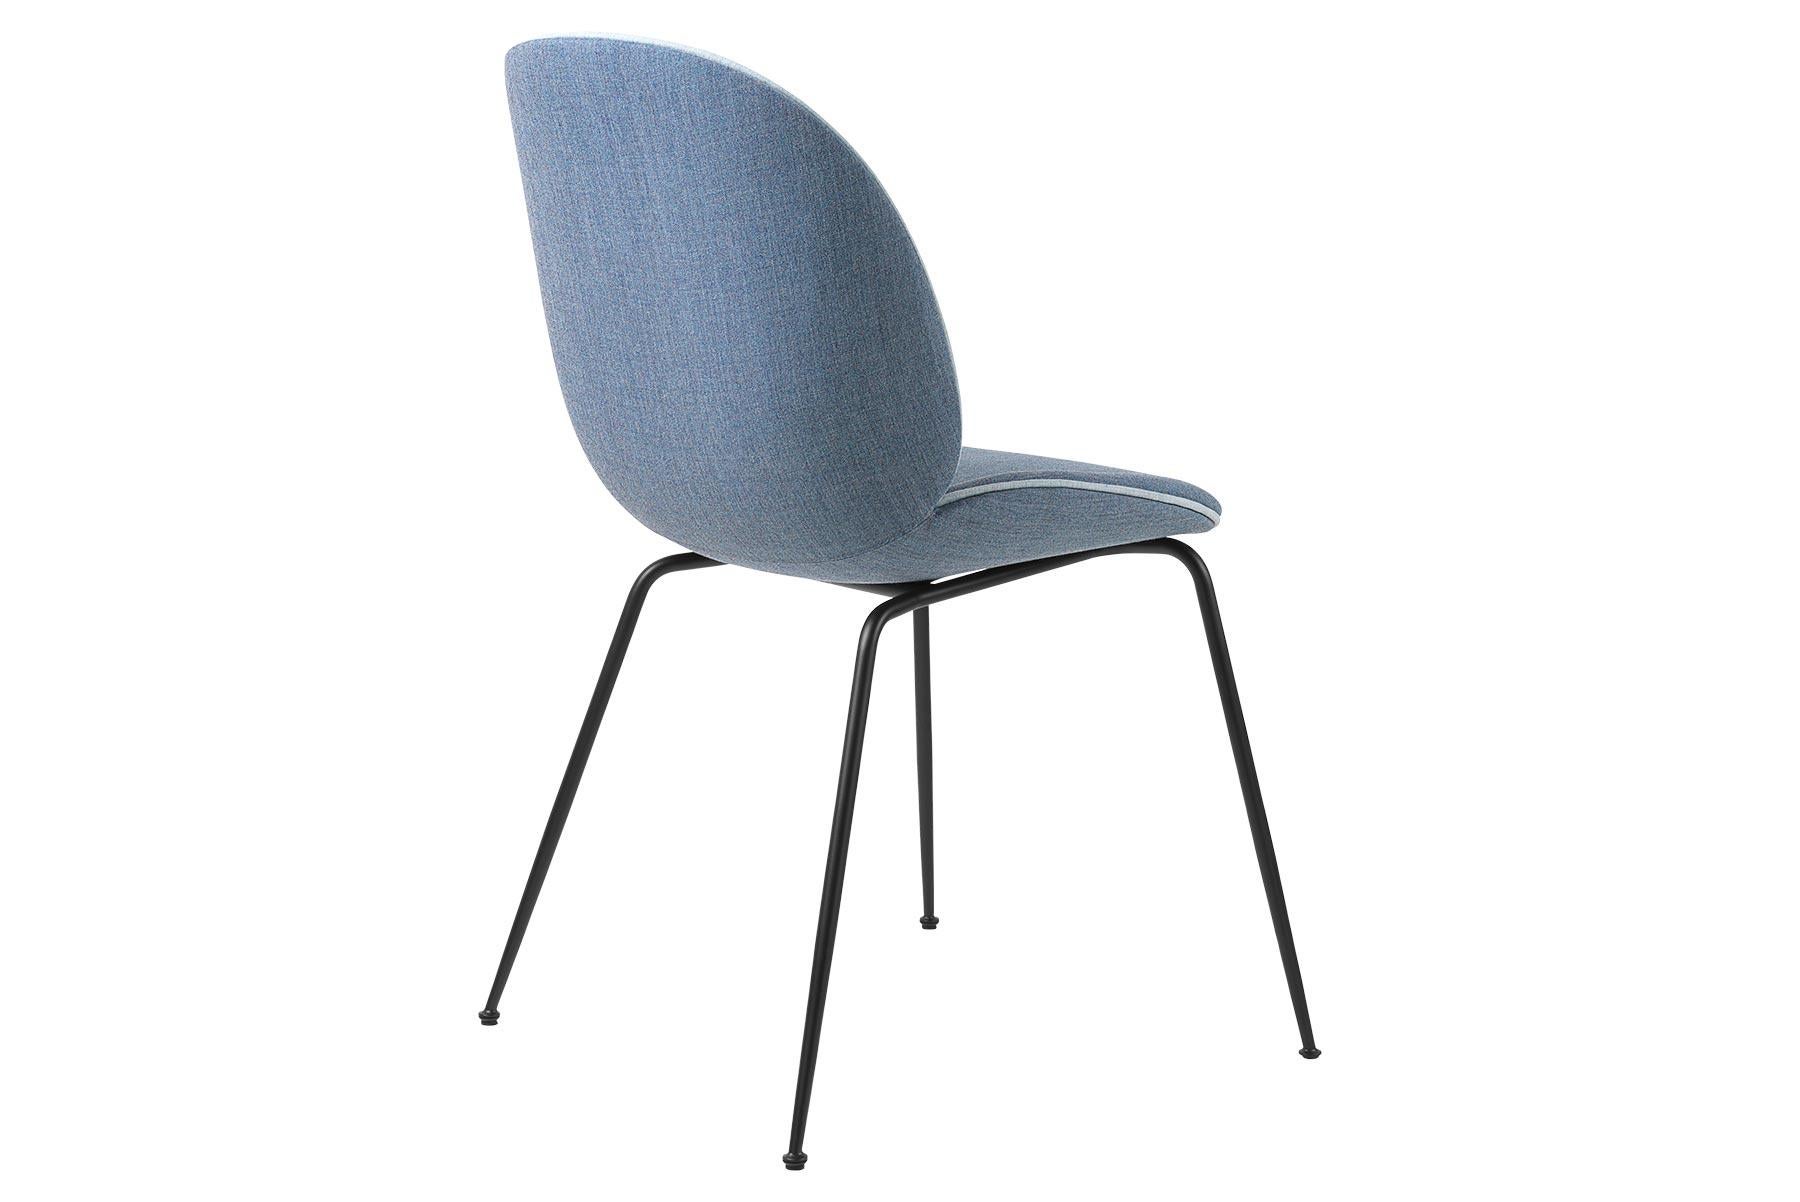 The beetle chair has since its introduction in 2013 being well received by end-consumers as well as interior architects. Due to its appealing design, outstanding comfort and unique customization possibilities, the chair can be seen in many of the